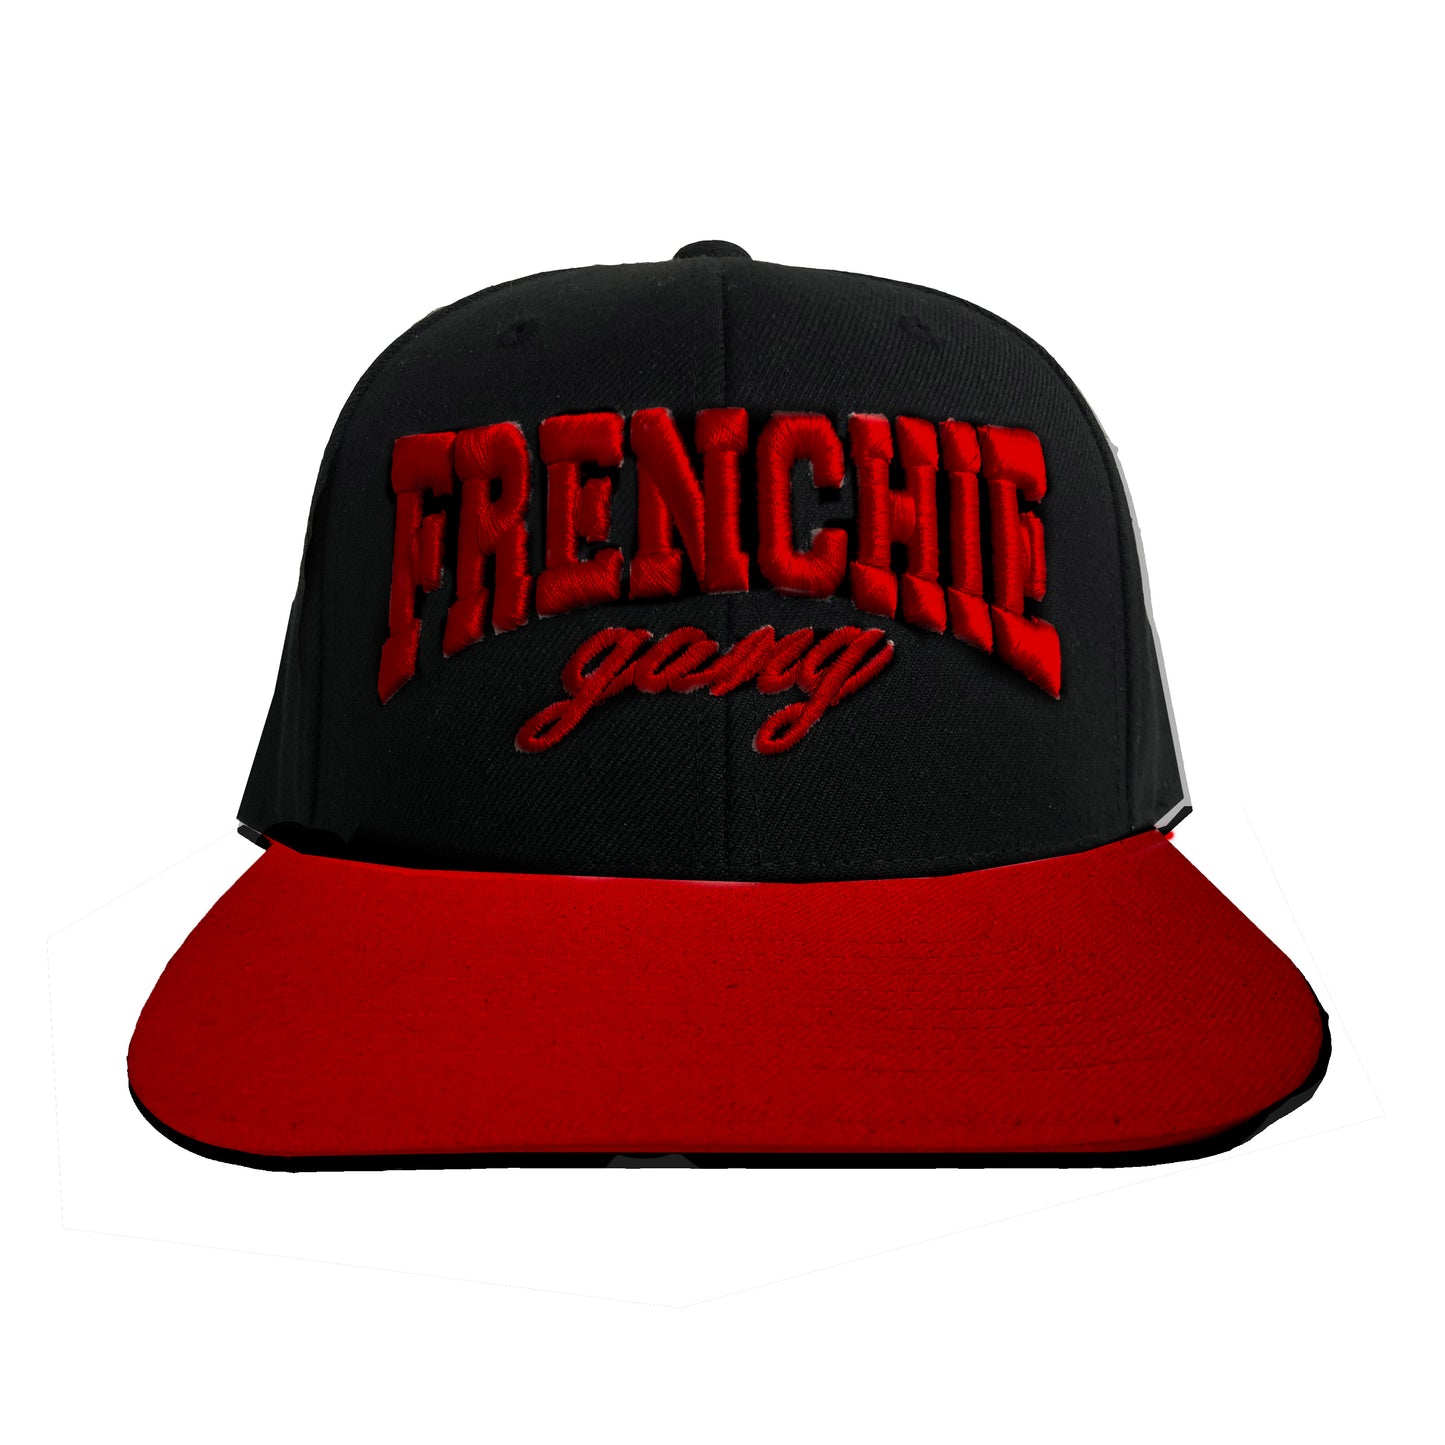 Frenchie Gang Logo Snapback With sidepatch 2 Tone